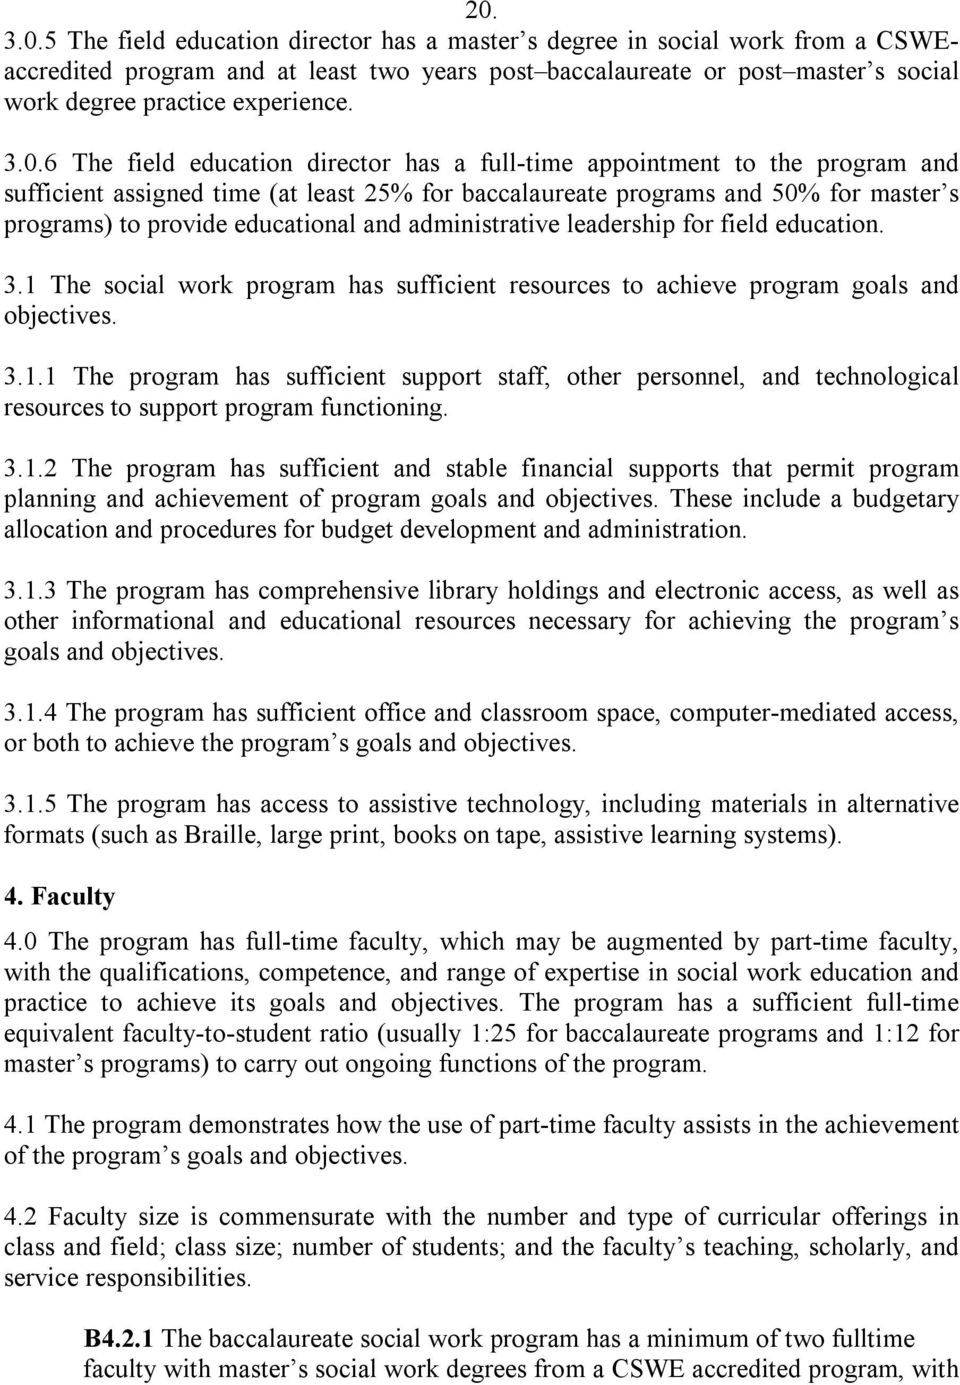 educational and administrative leadership for field education. 3.1 The social work program has sufficient resources to achieve program goals and objectives. 3.1.1 The program has sufficient support staff, other personnel, and technological resources to support program functioning.